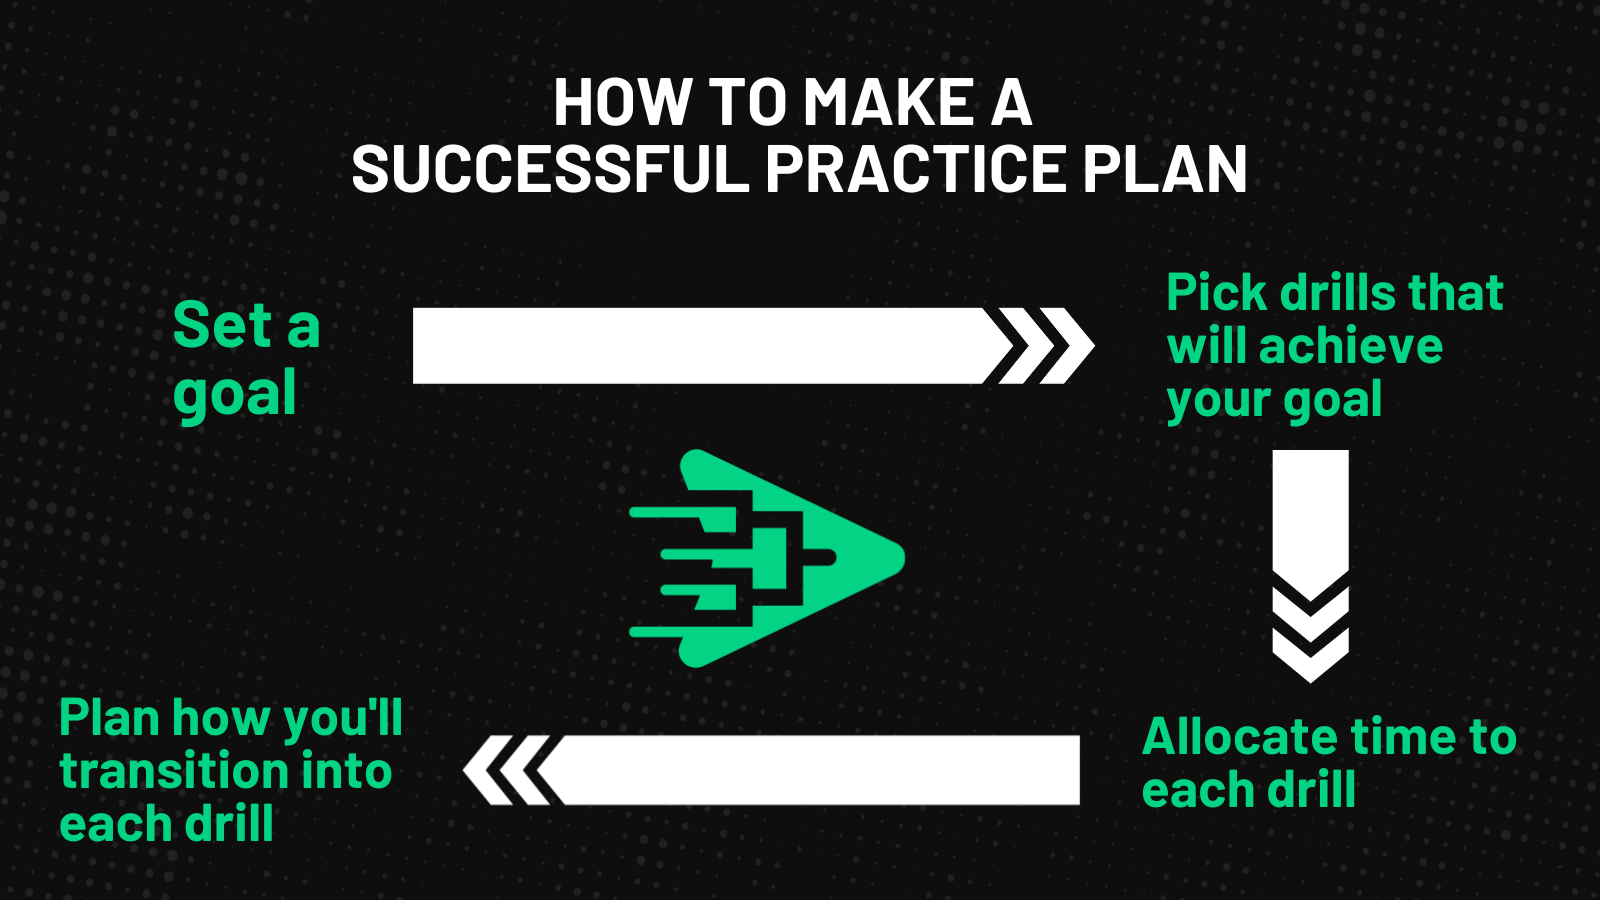 How to Make a Successful Practice Plan infographic